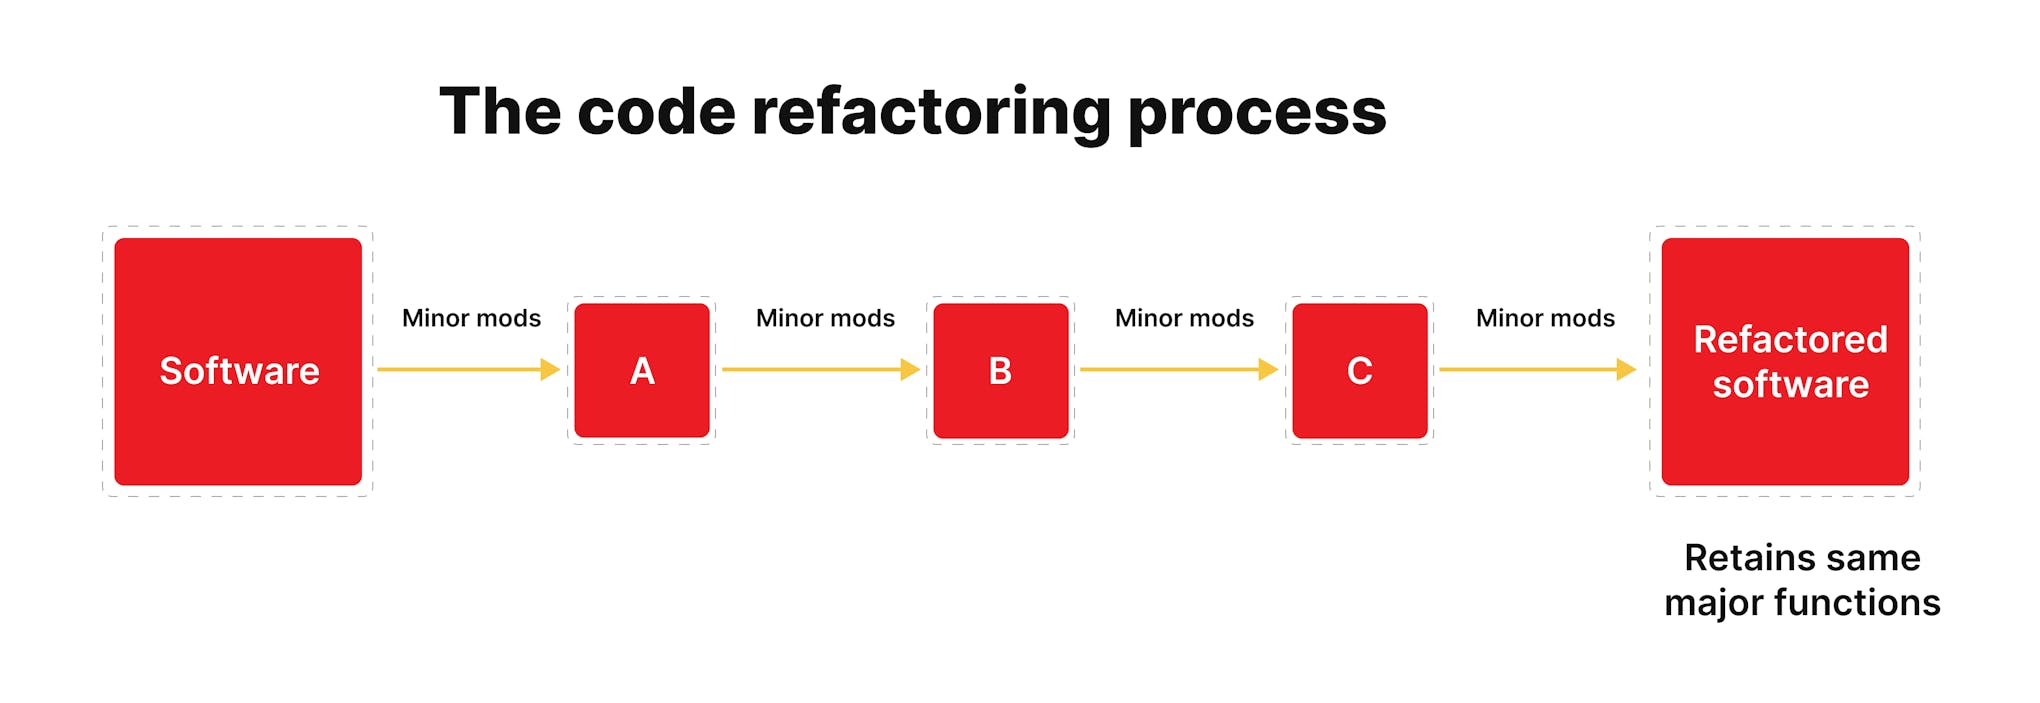 The code refactoring process.